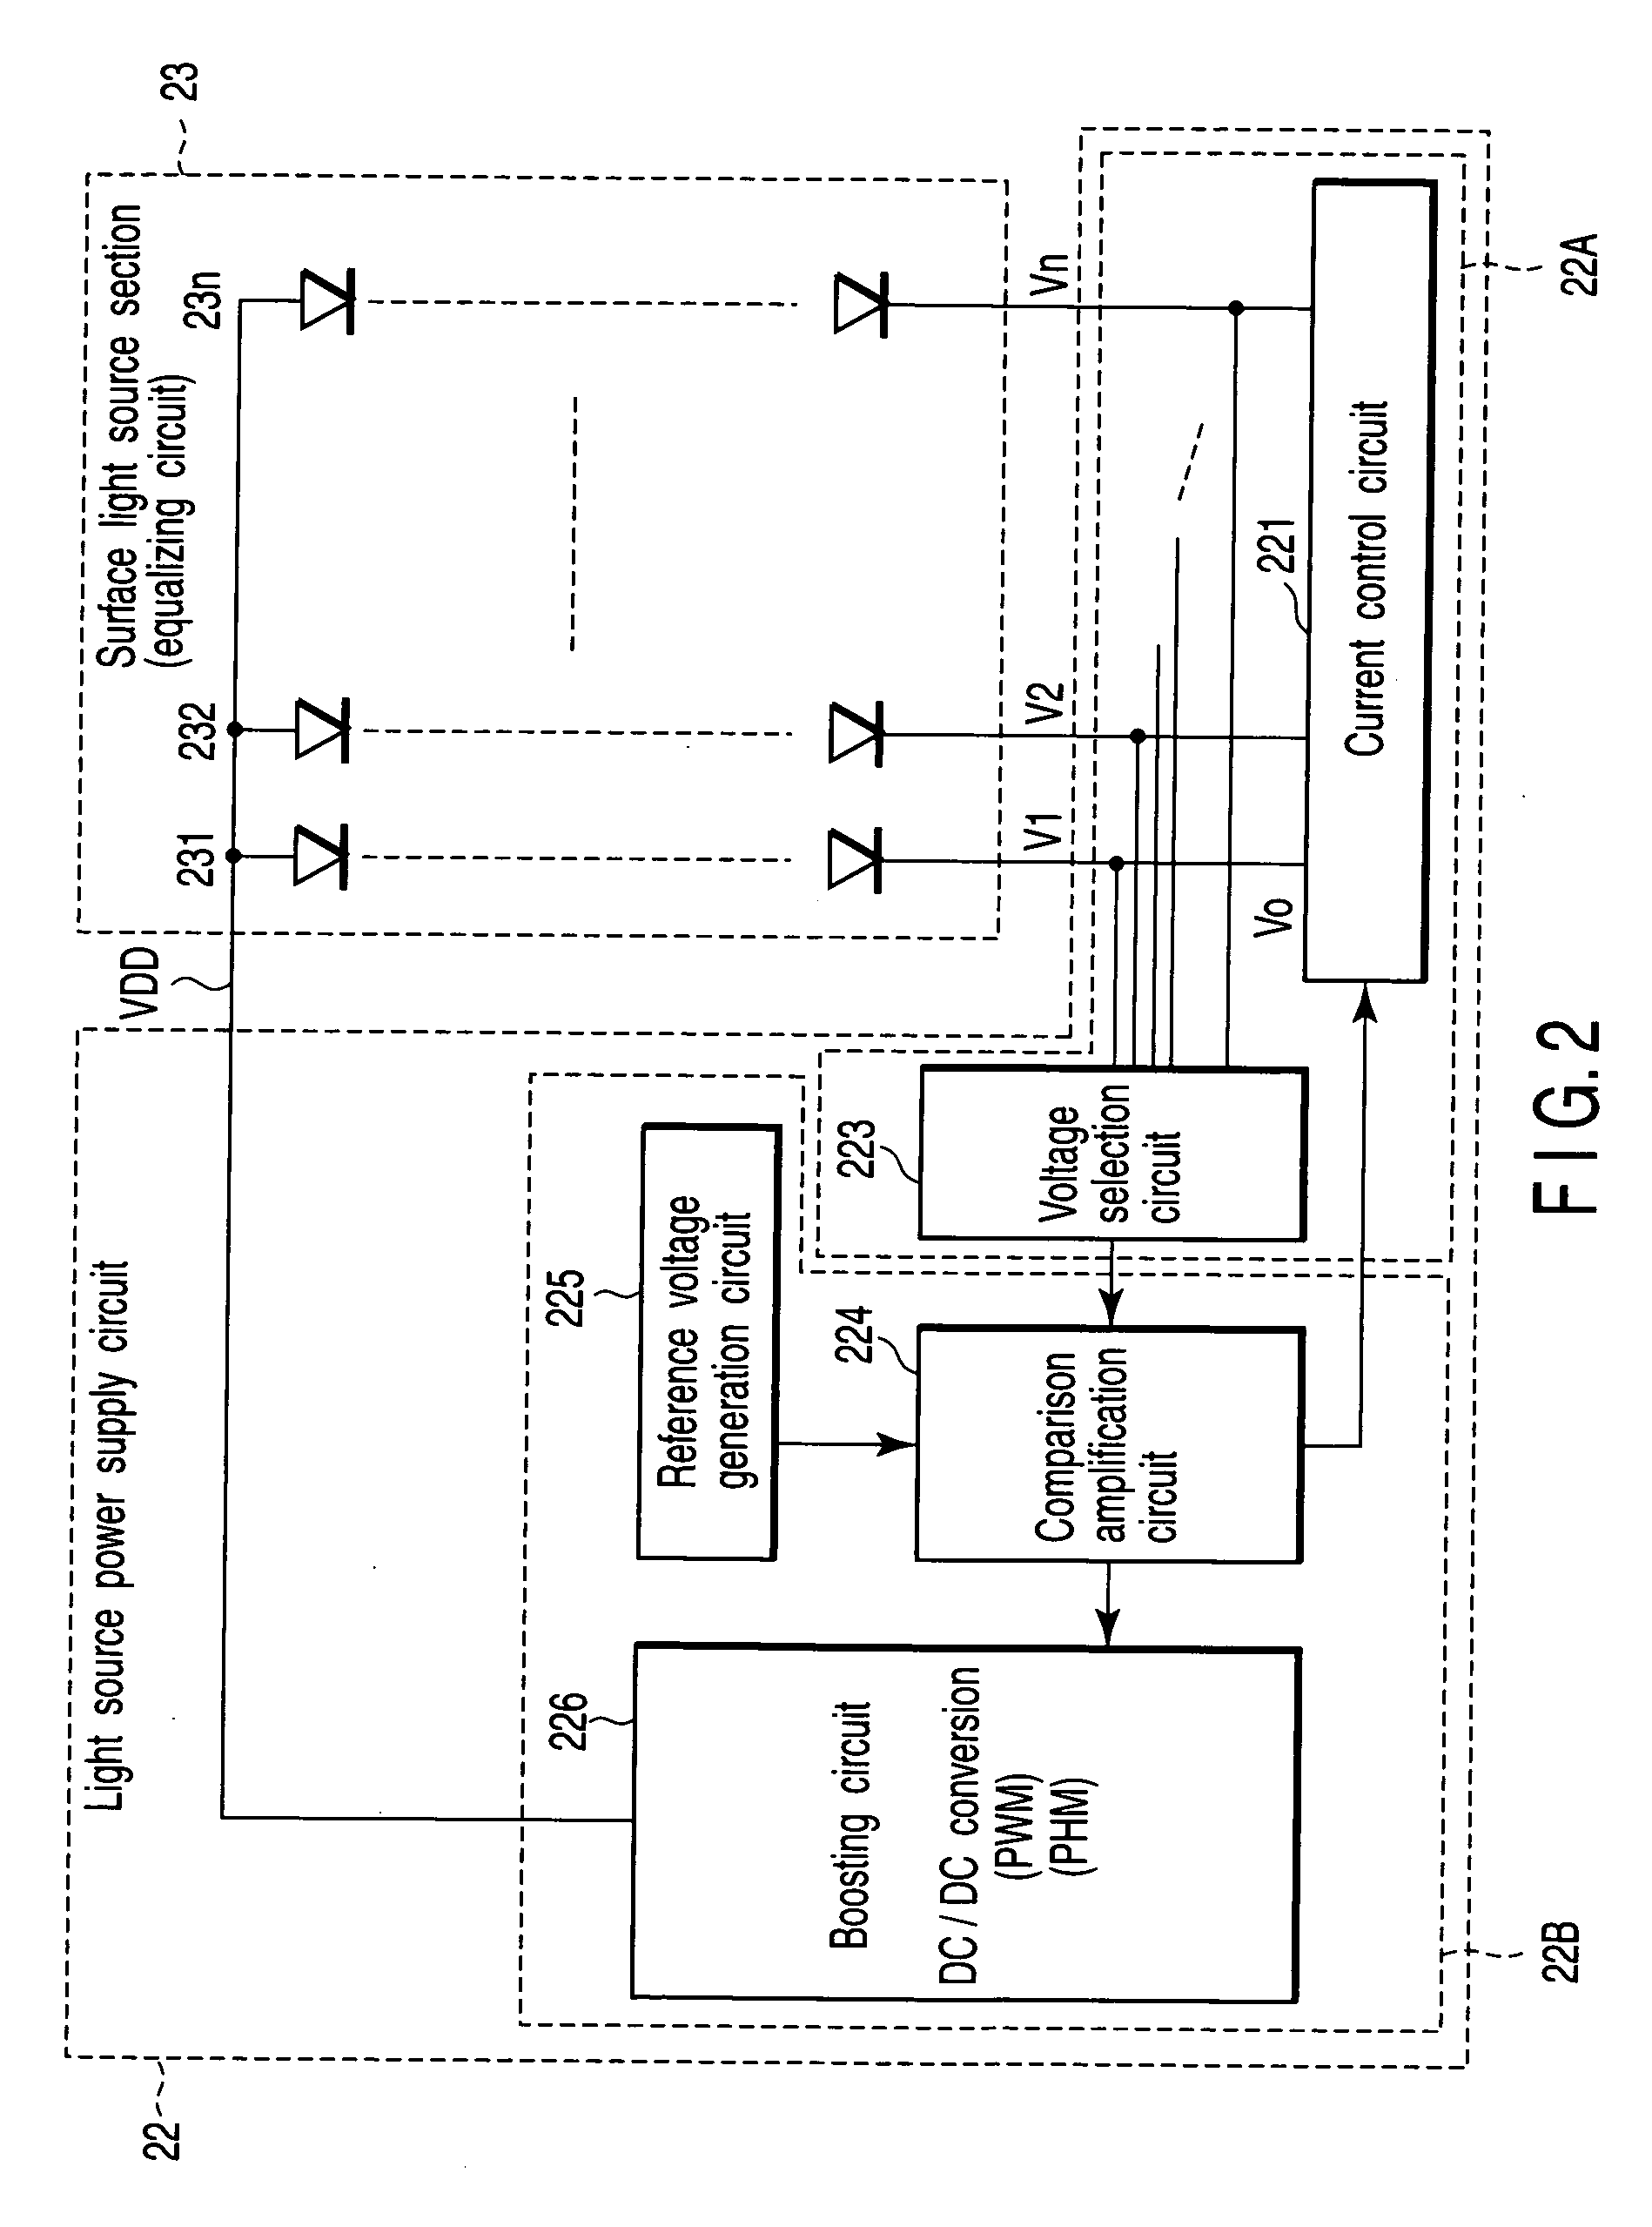 Surface light source control device